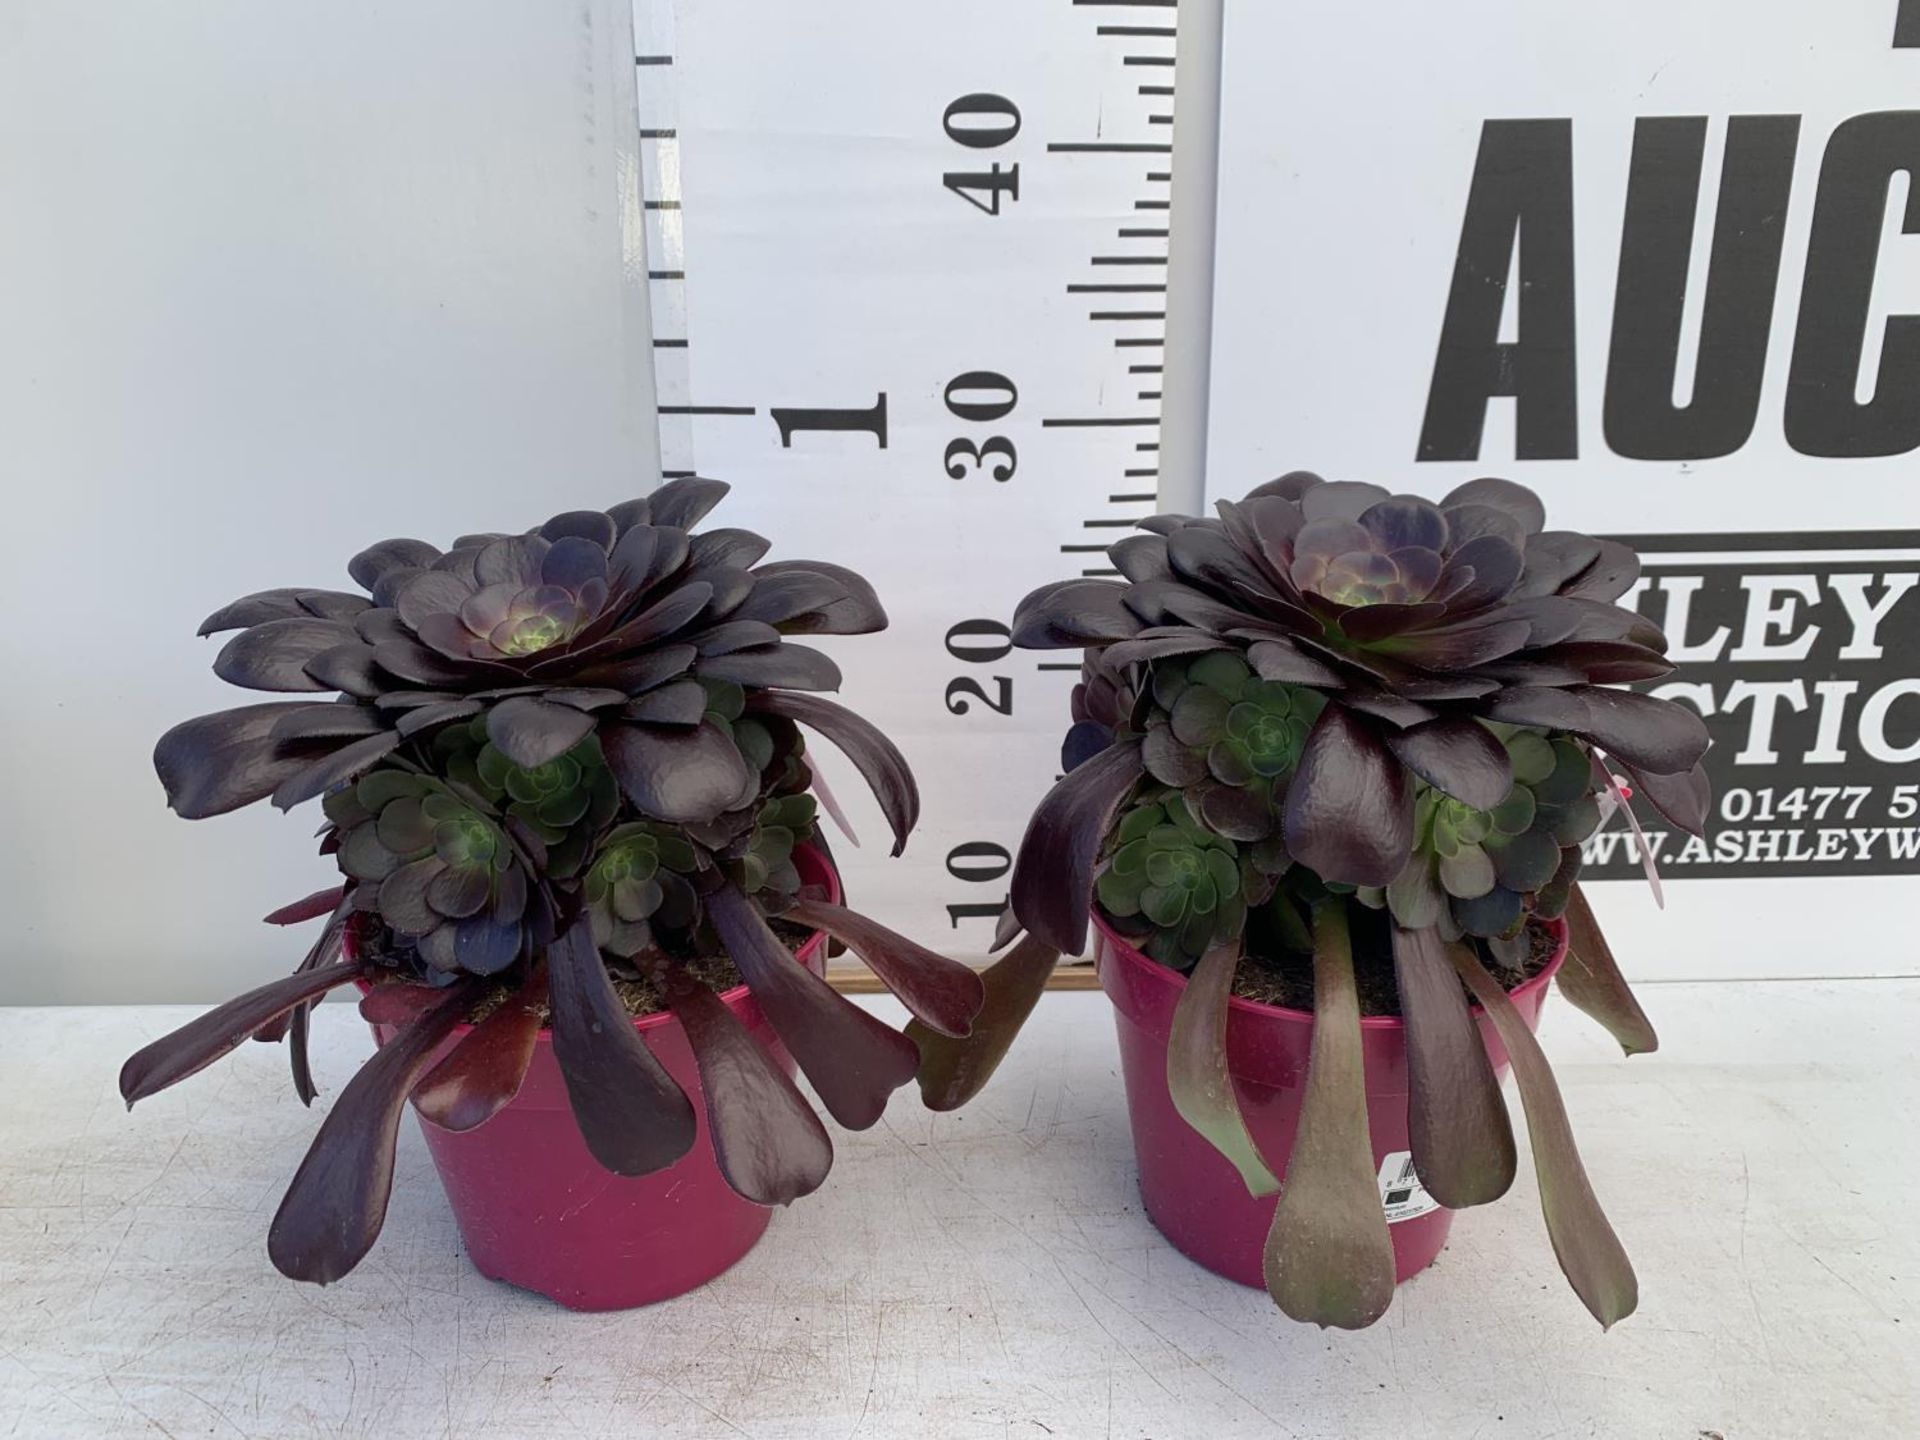 TWO AEONIUM ARBOREUM VELOURS IN 1 LTR POTS 25CM TALL PLUS VAT TO BE SOLD FOR THE TWO - Image 2 of 6